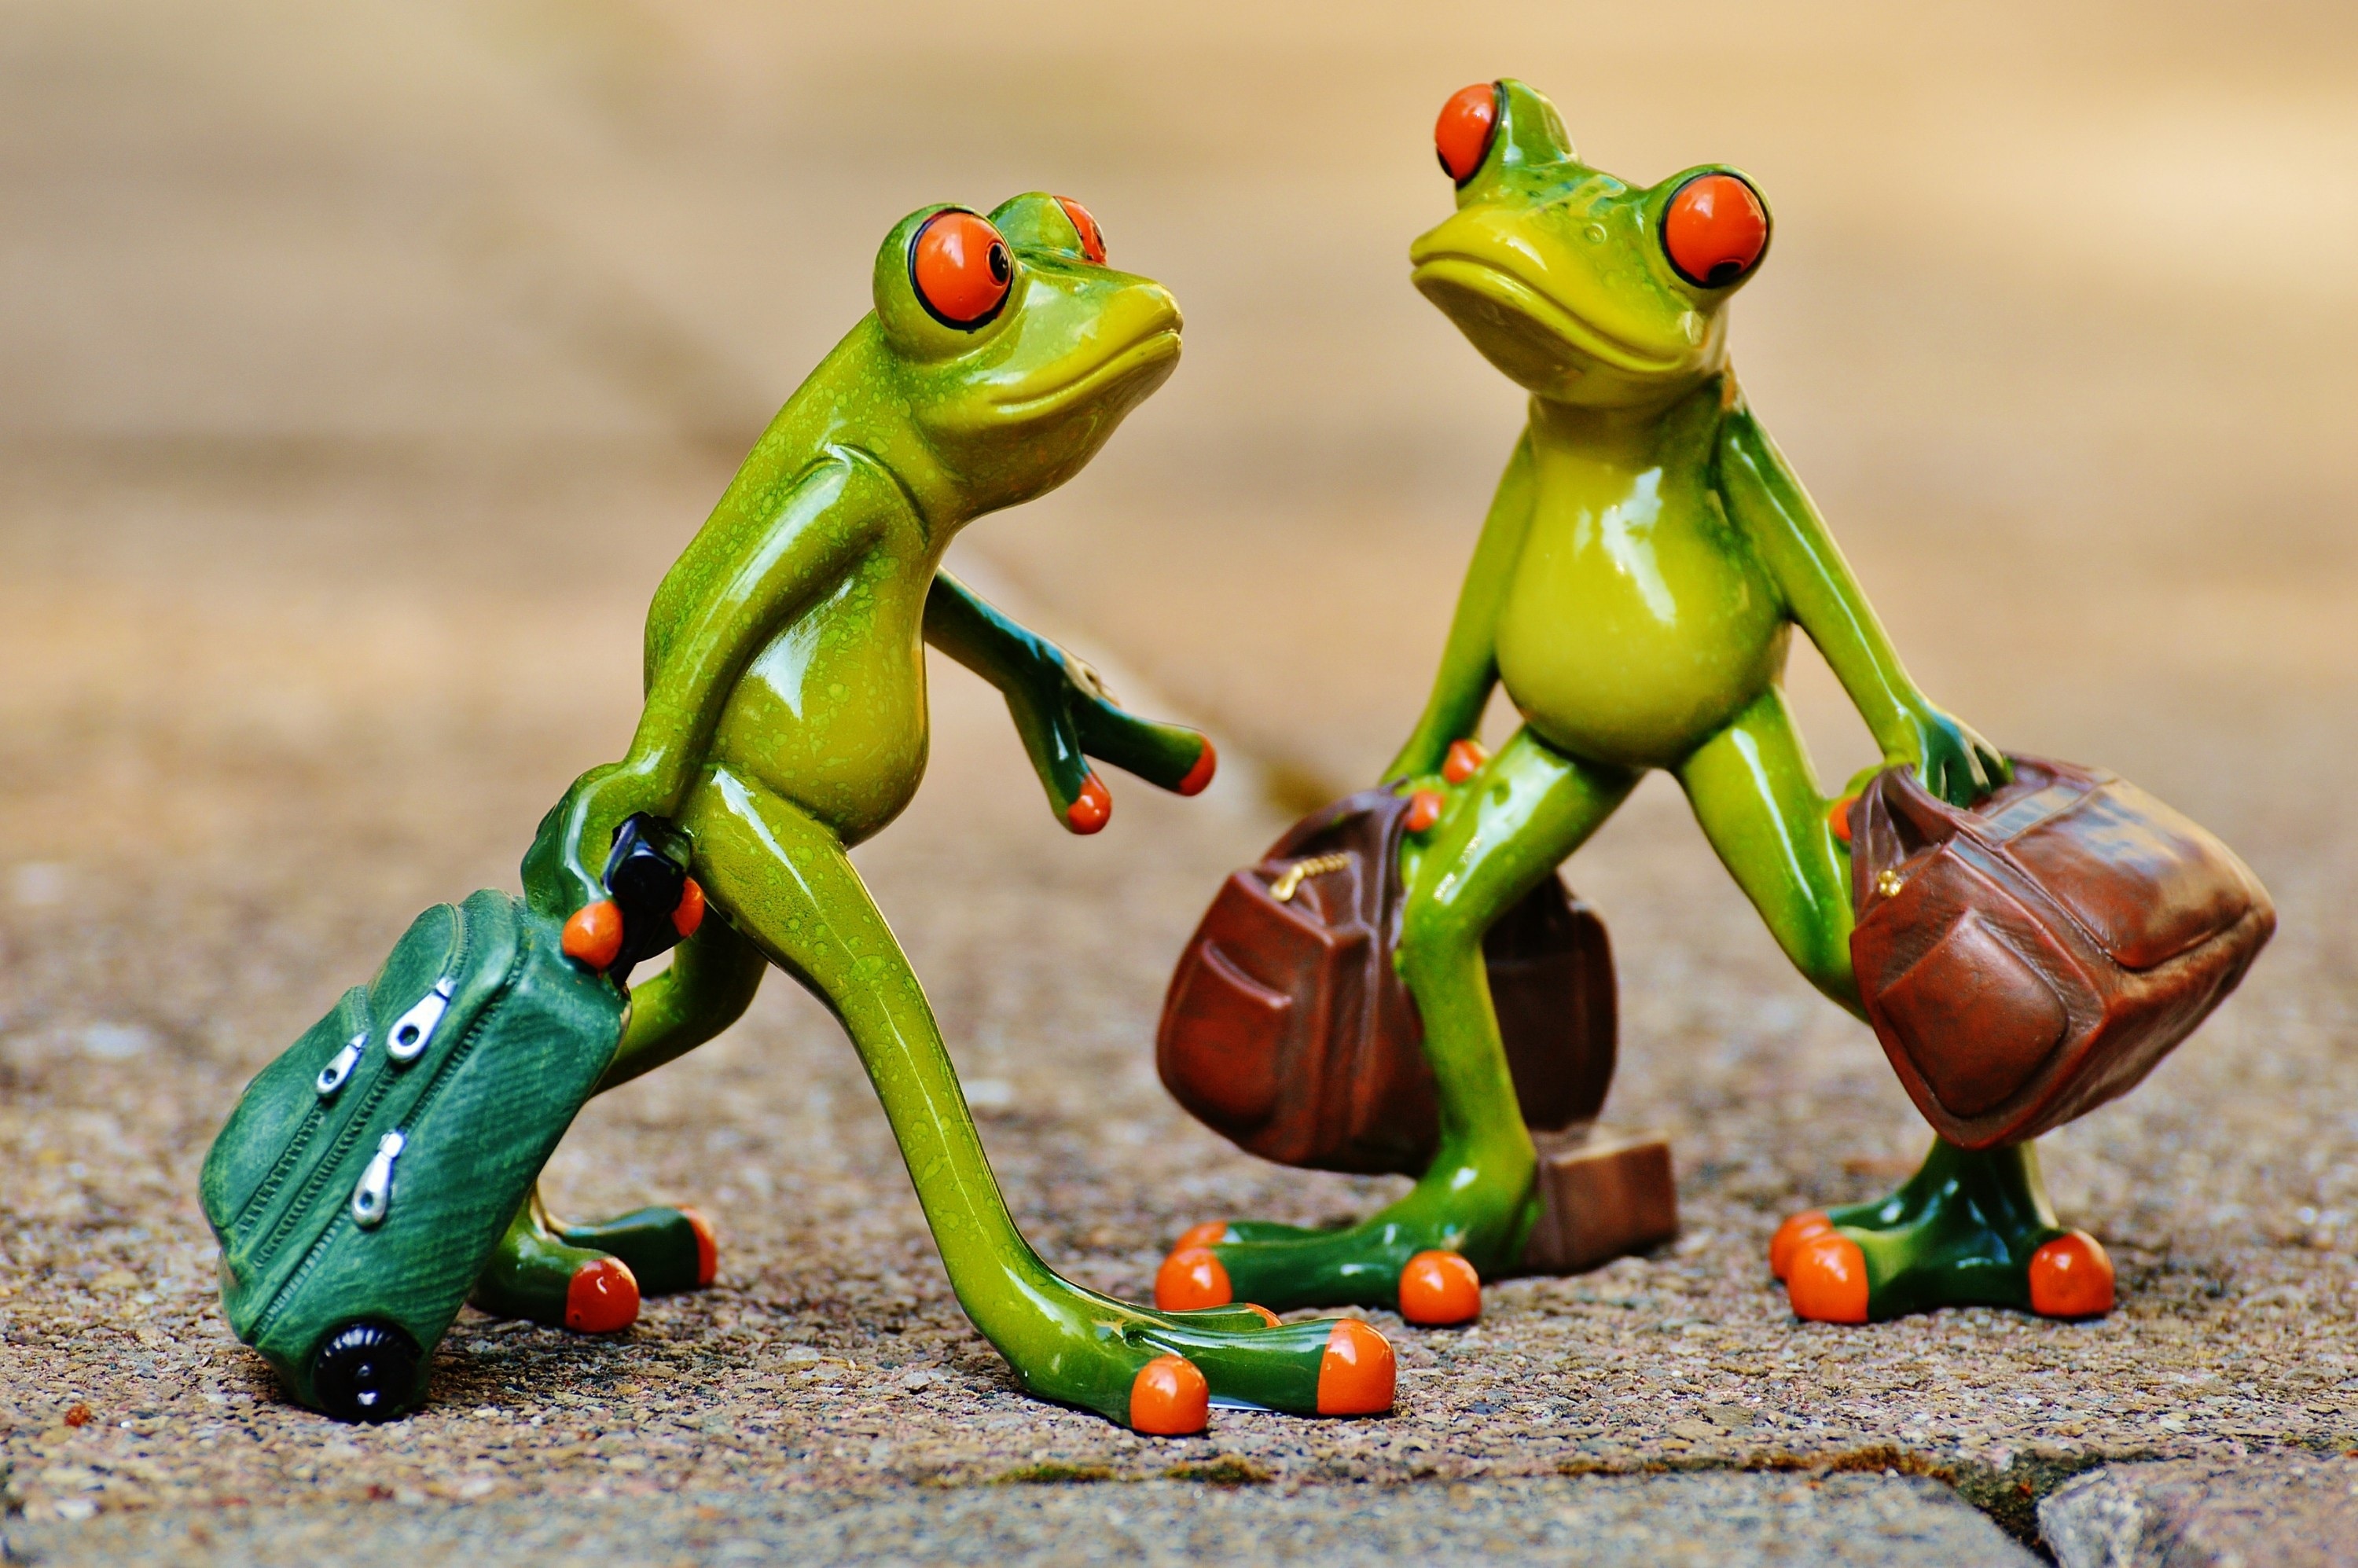 Two figurines of frogs carrying luggage